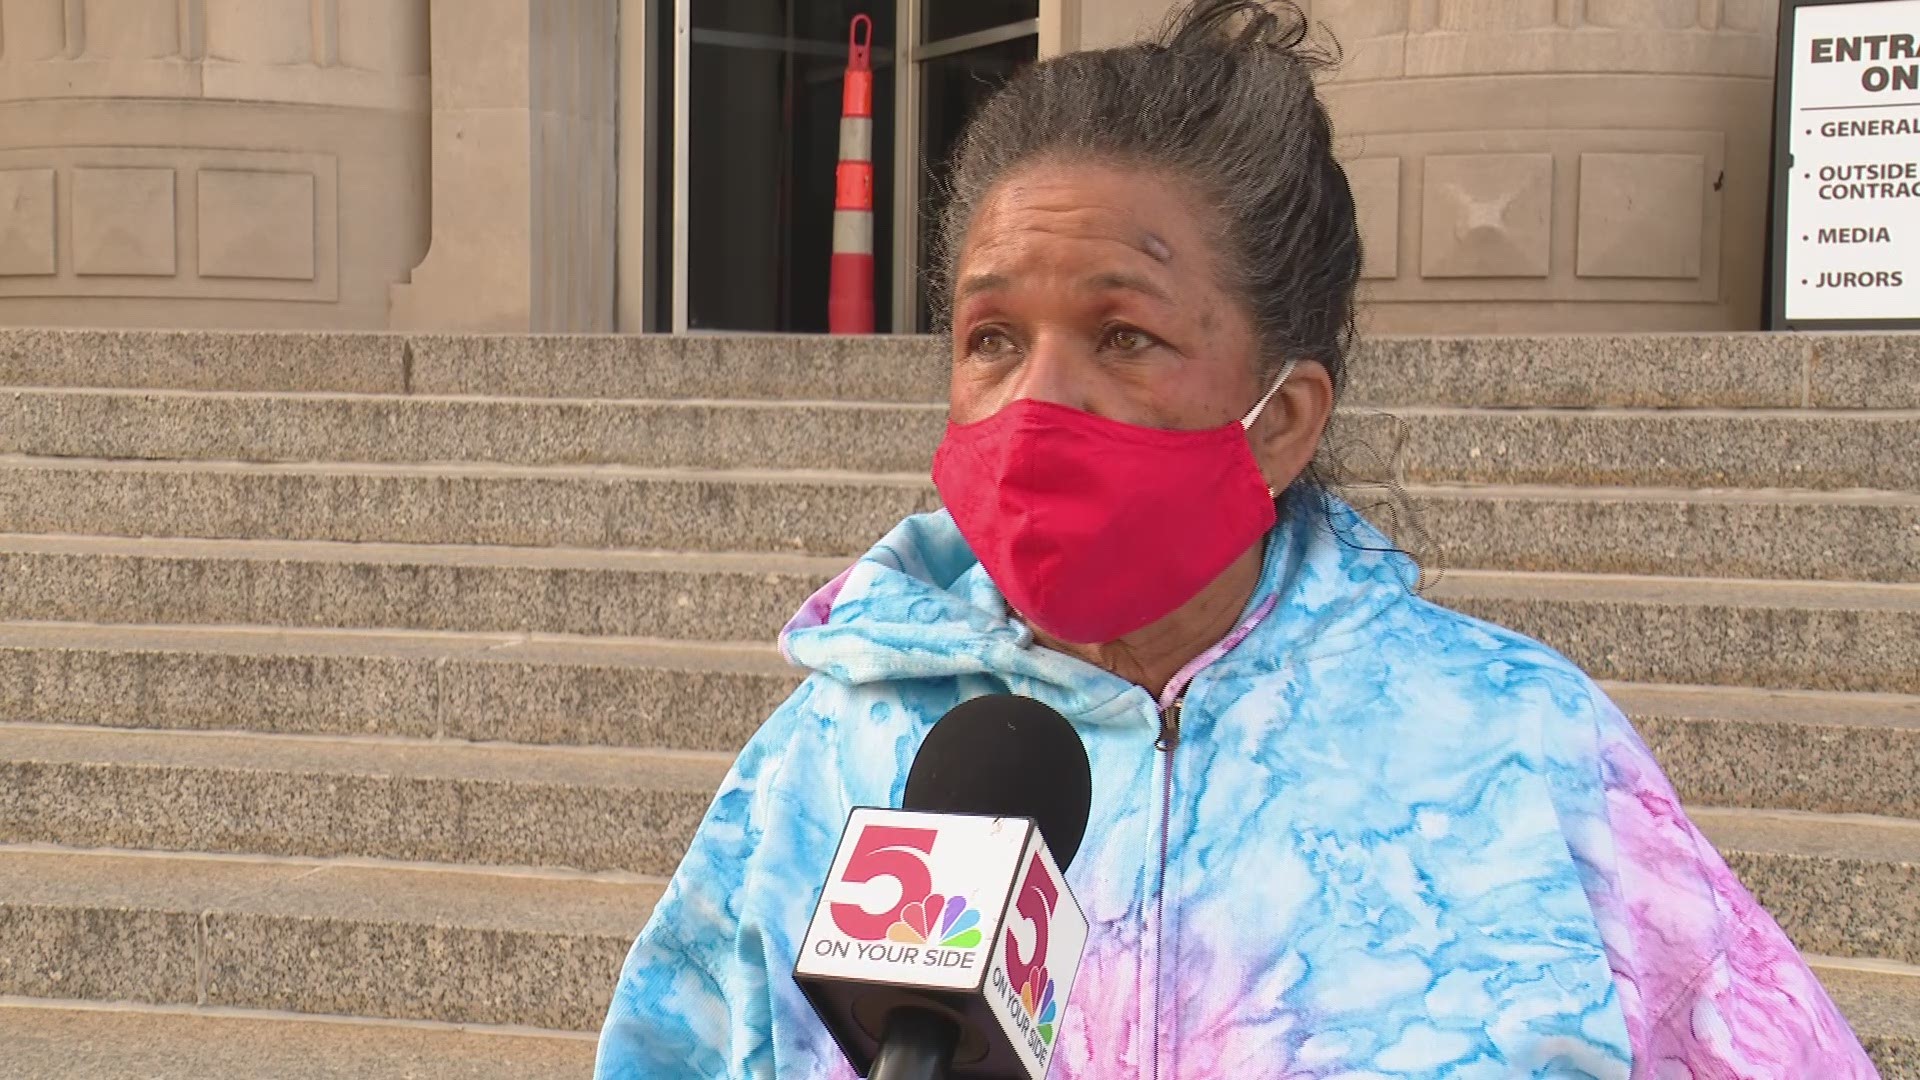 Youvette Townsend said her son is in jail for defending his property